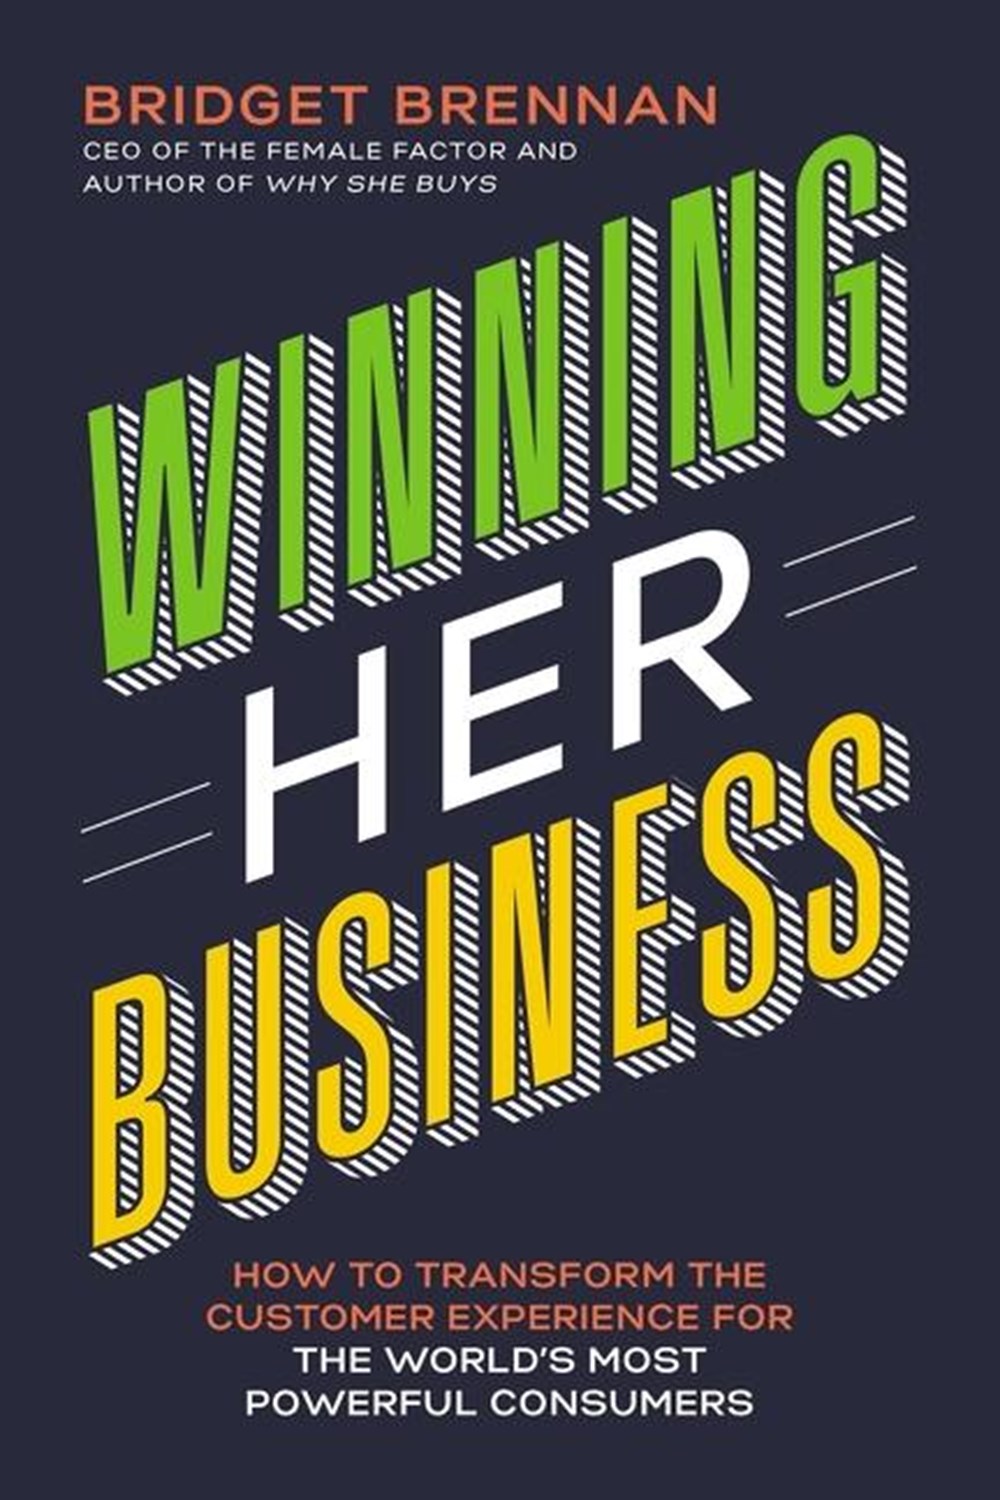 Winning Her Business How to Transform the Customer Experience for the World's Most Powerful Consumer